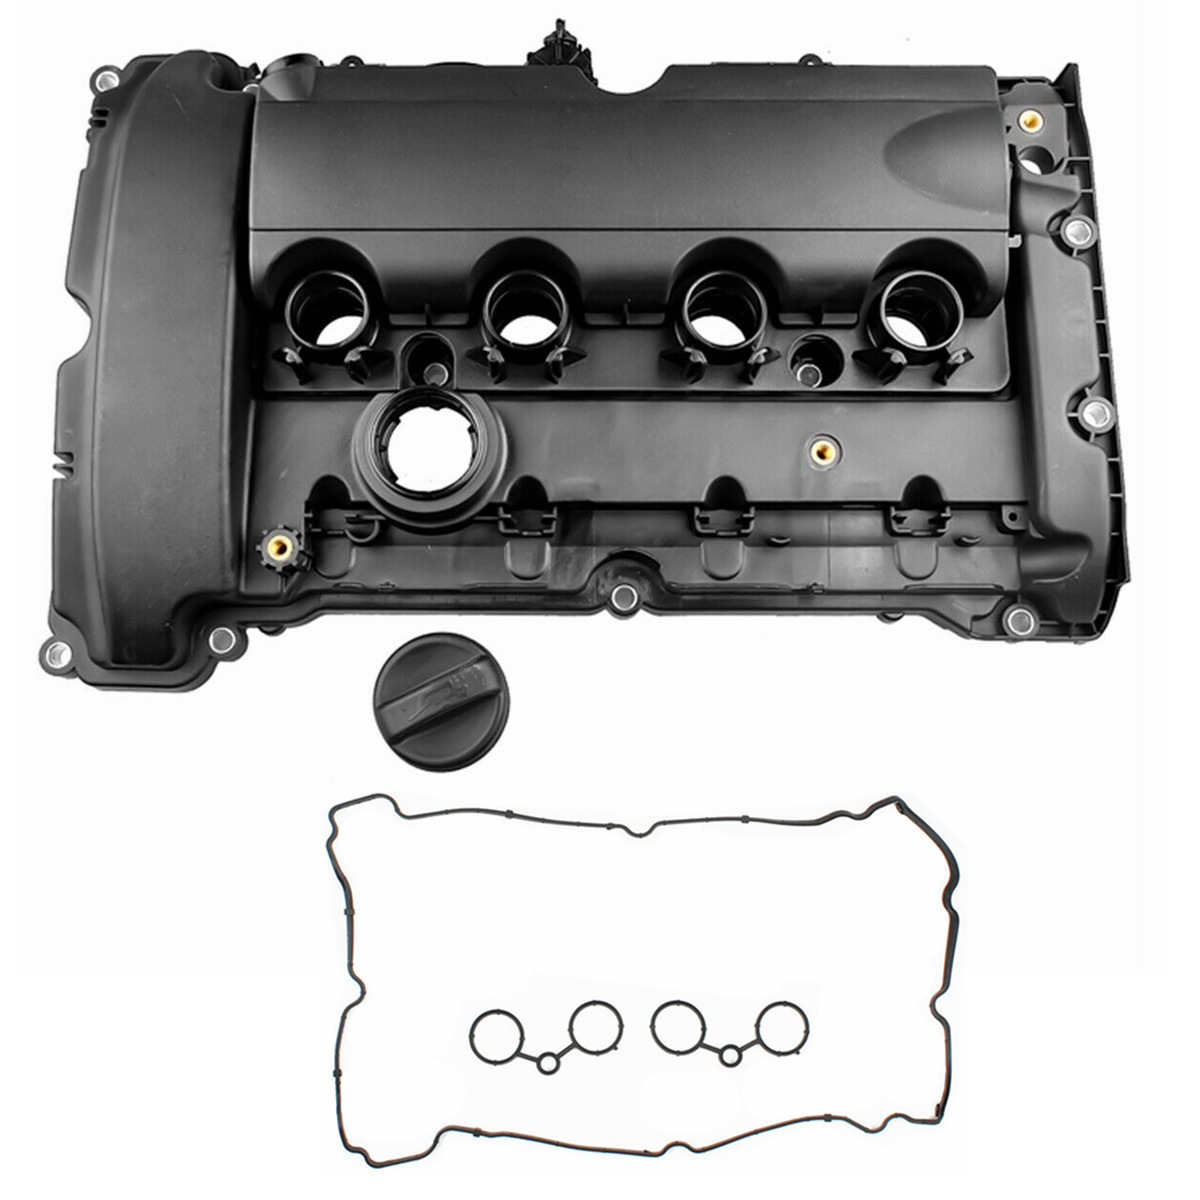 Engine Valve Cover w/Gasket For 2007-2012 Mini Cooper S JCW R55 R56 R57 R60 1.6L